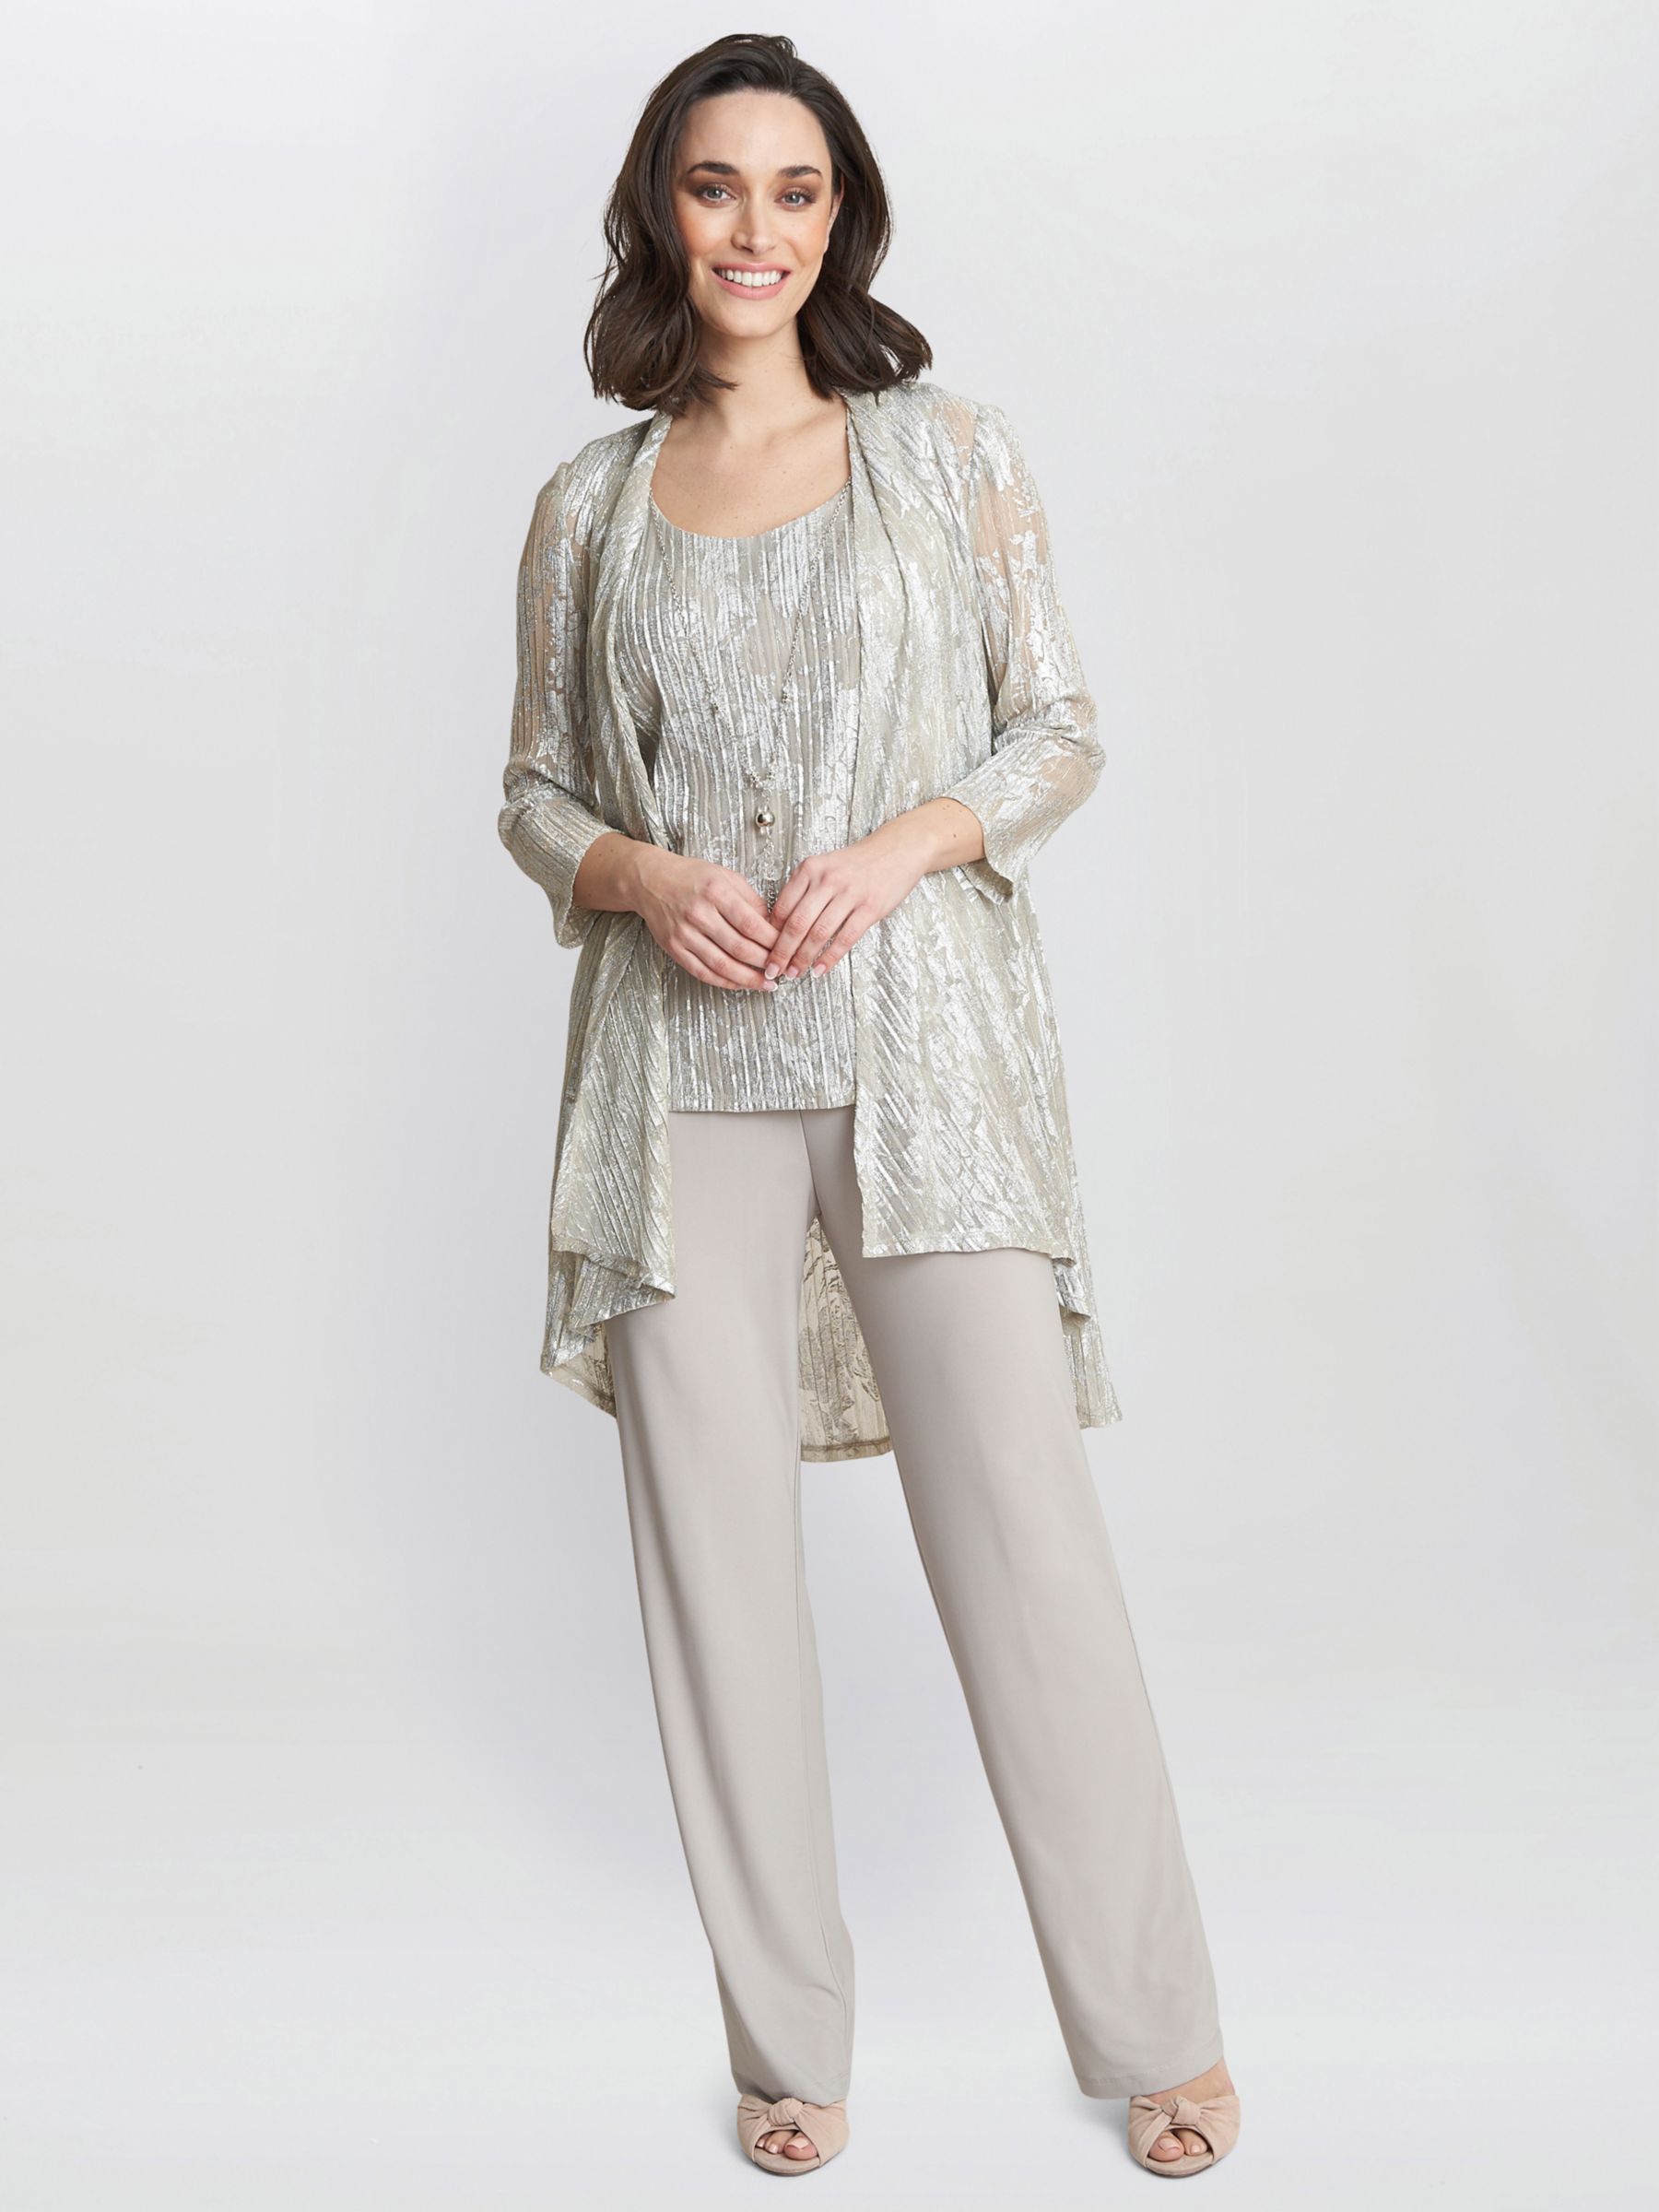 Gina Bacconi Mabel Three Piece Jacquard Trouser Suit, Champagne, 10